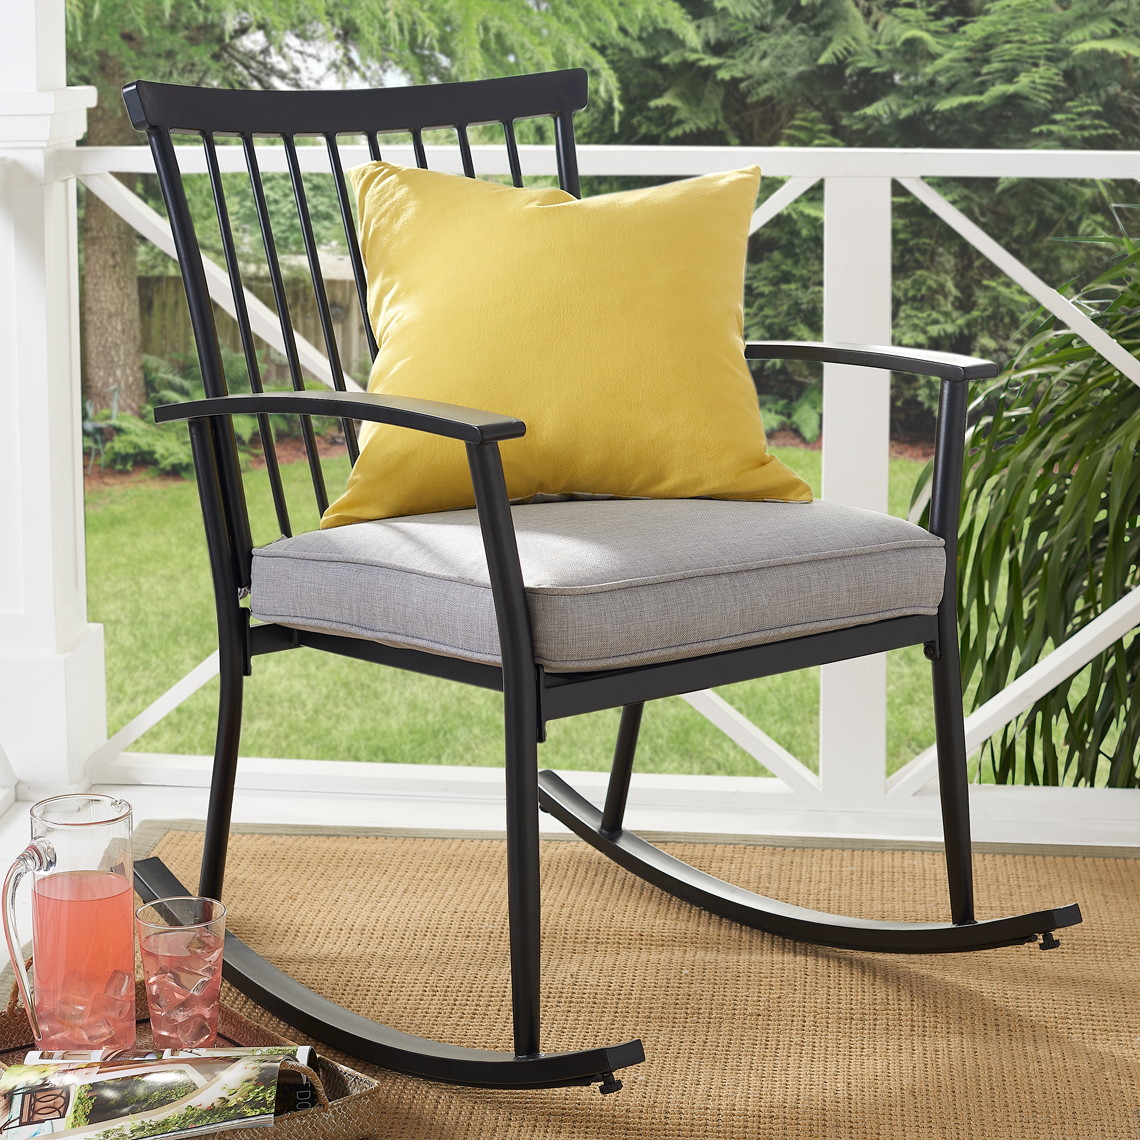 Patio Clearance! Rocking Chairs, as Low as $75 at Walmart! - The Krazy